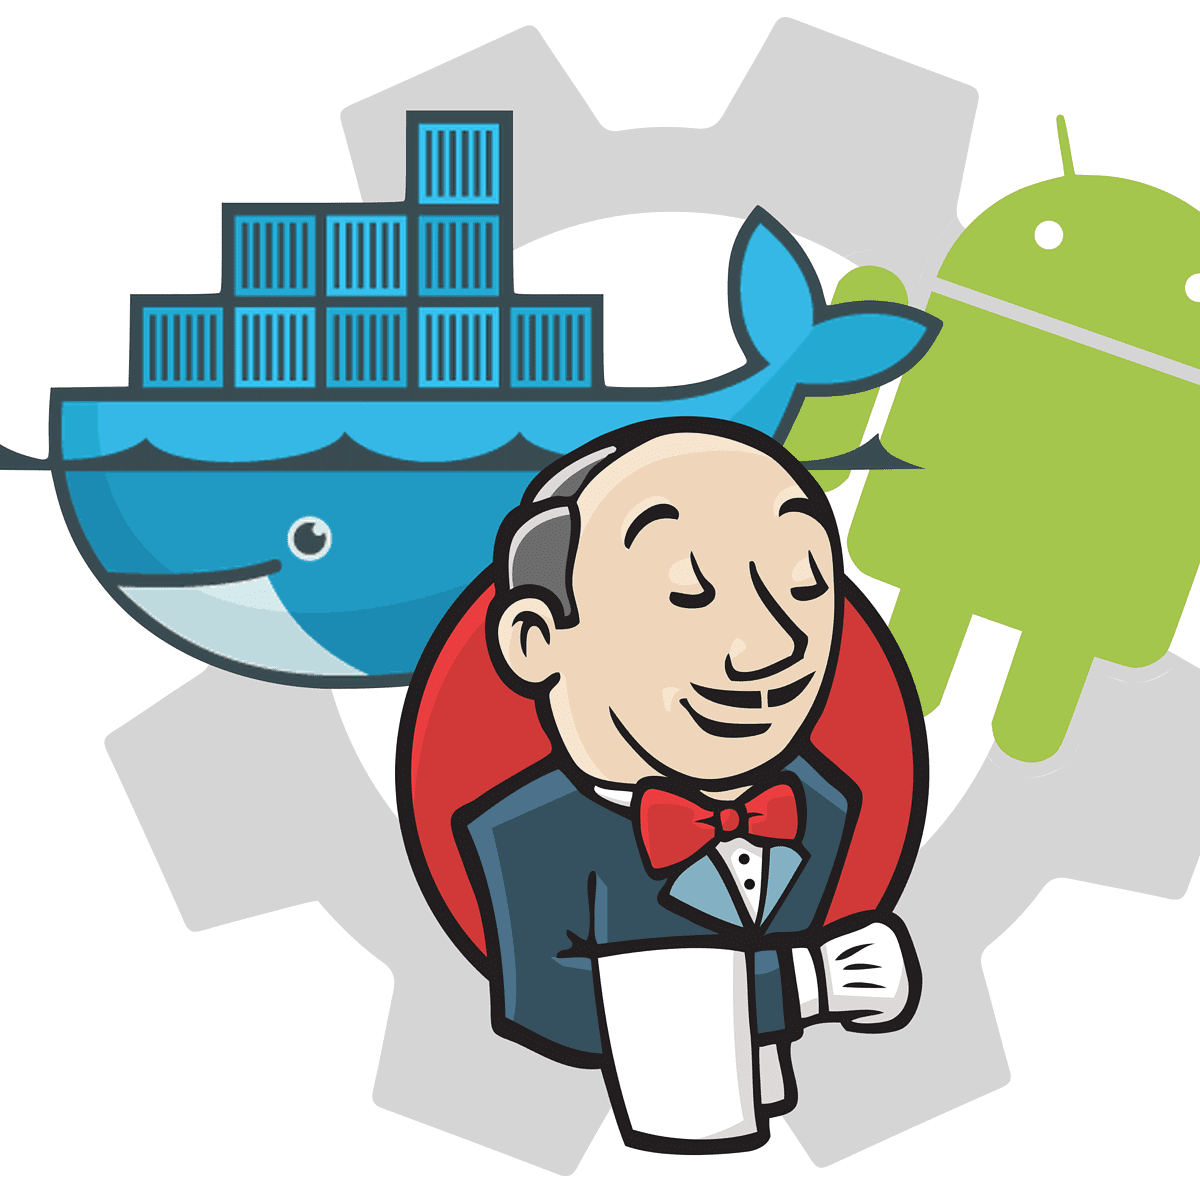 How to setup a CI/CD pipeline for Android using Jenkins and Docker - Part 2